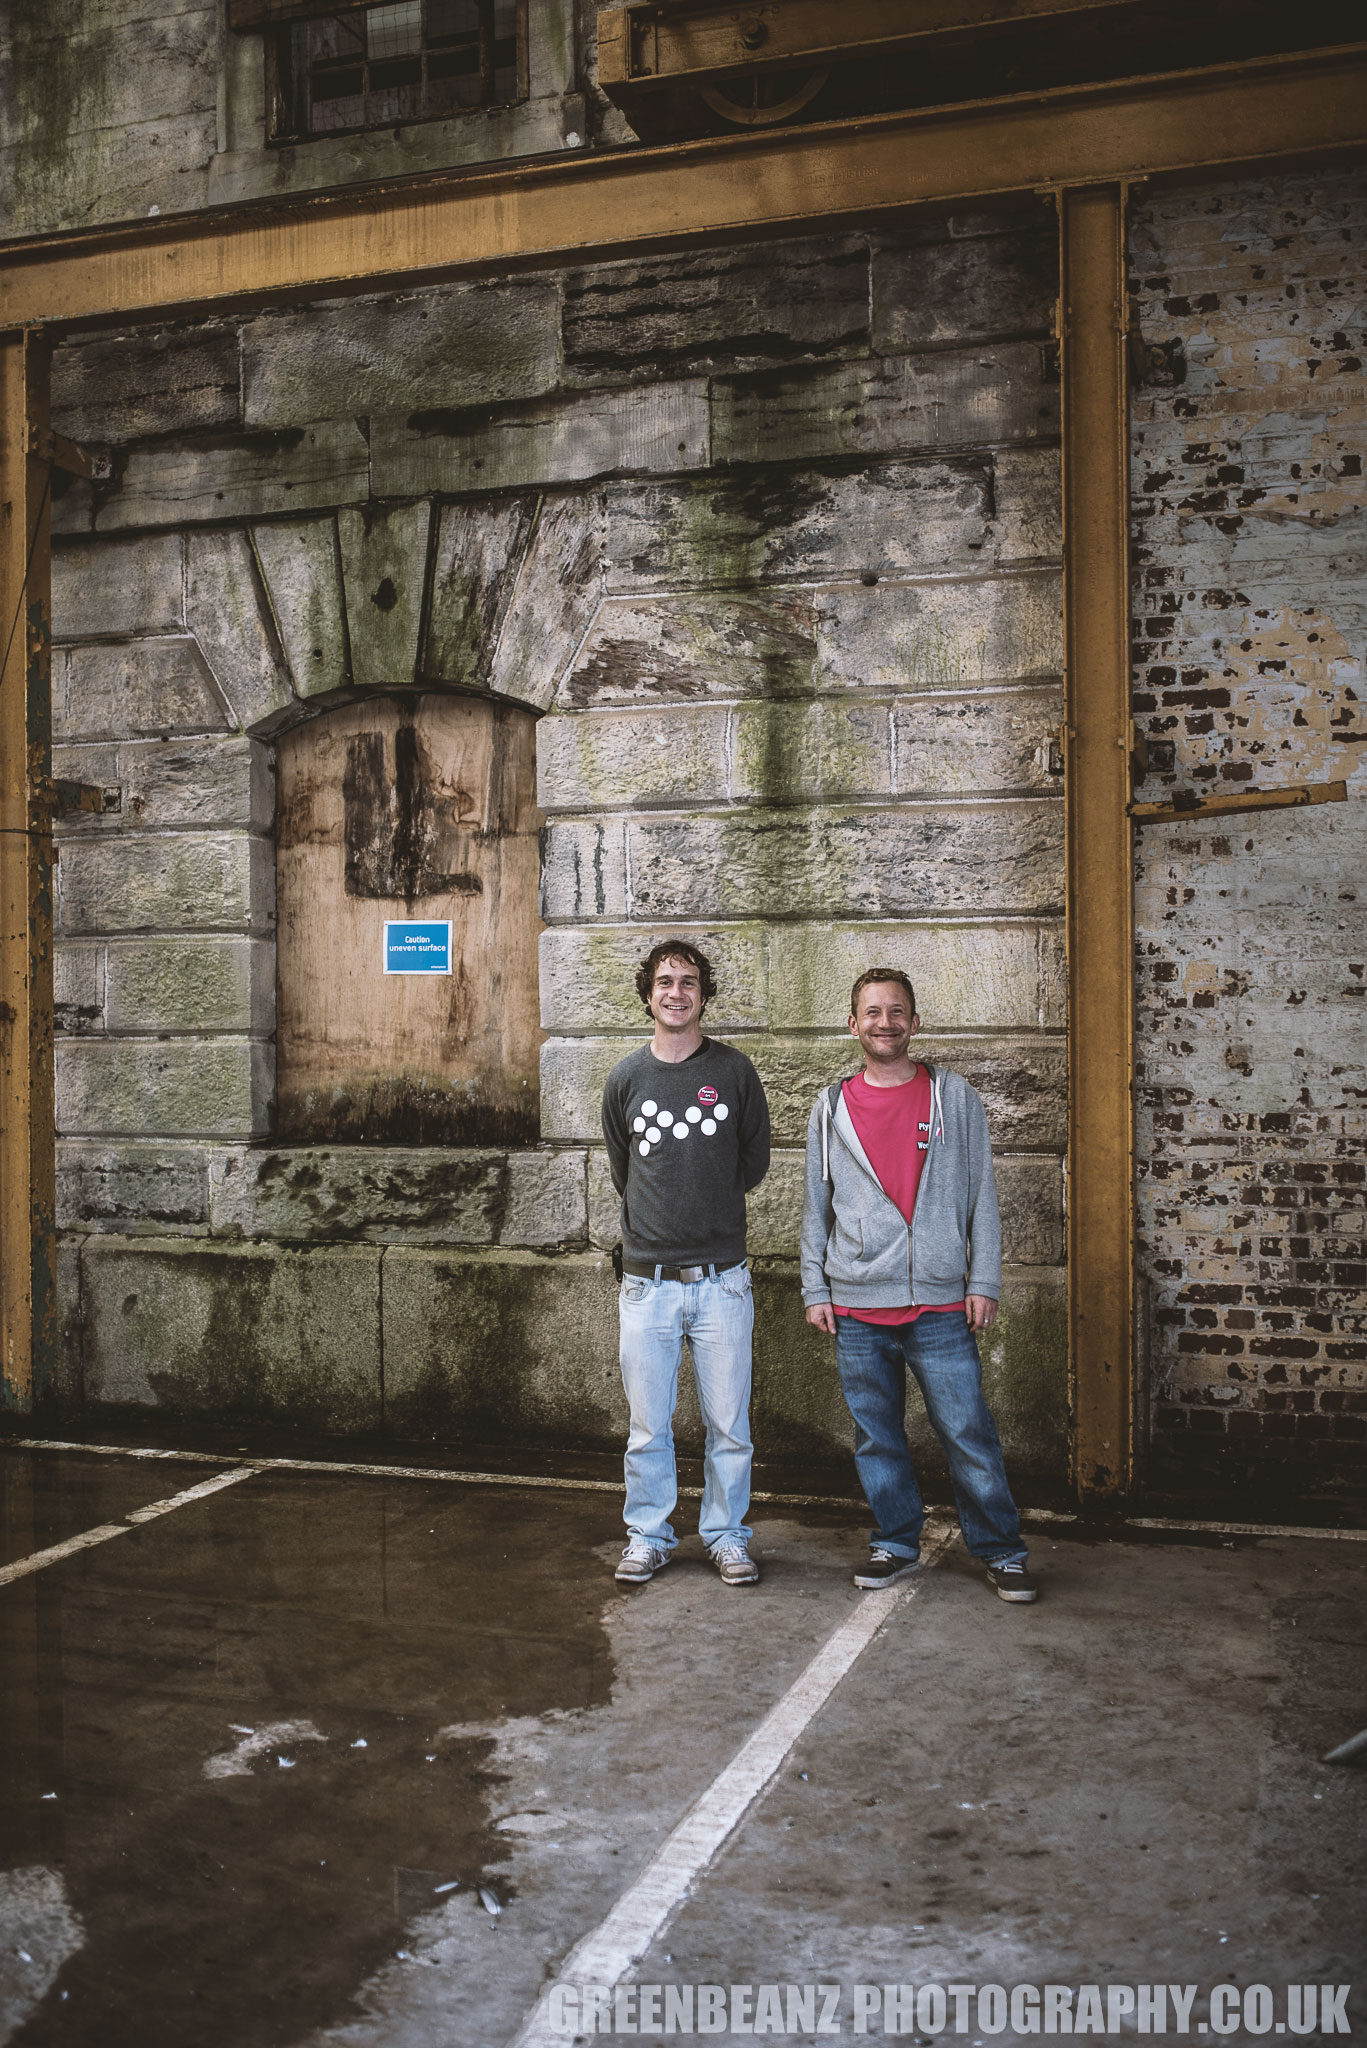 The Artists Christian Gale and Sam Ackroyd at The Royal William Yard